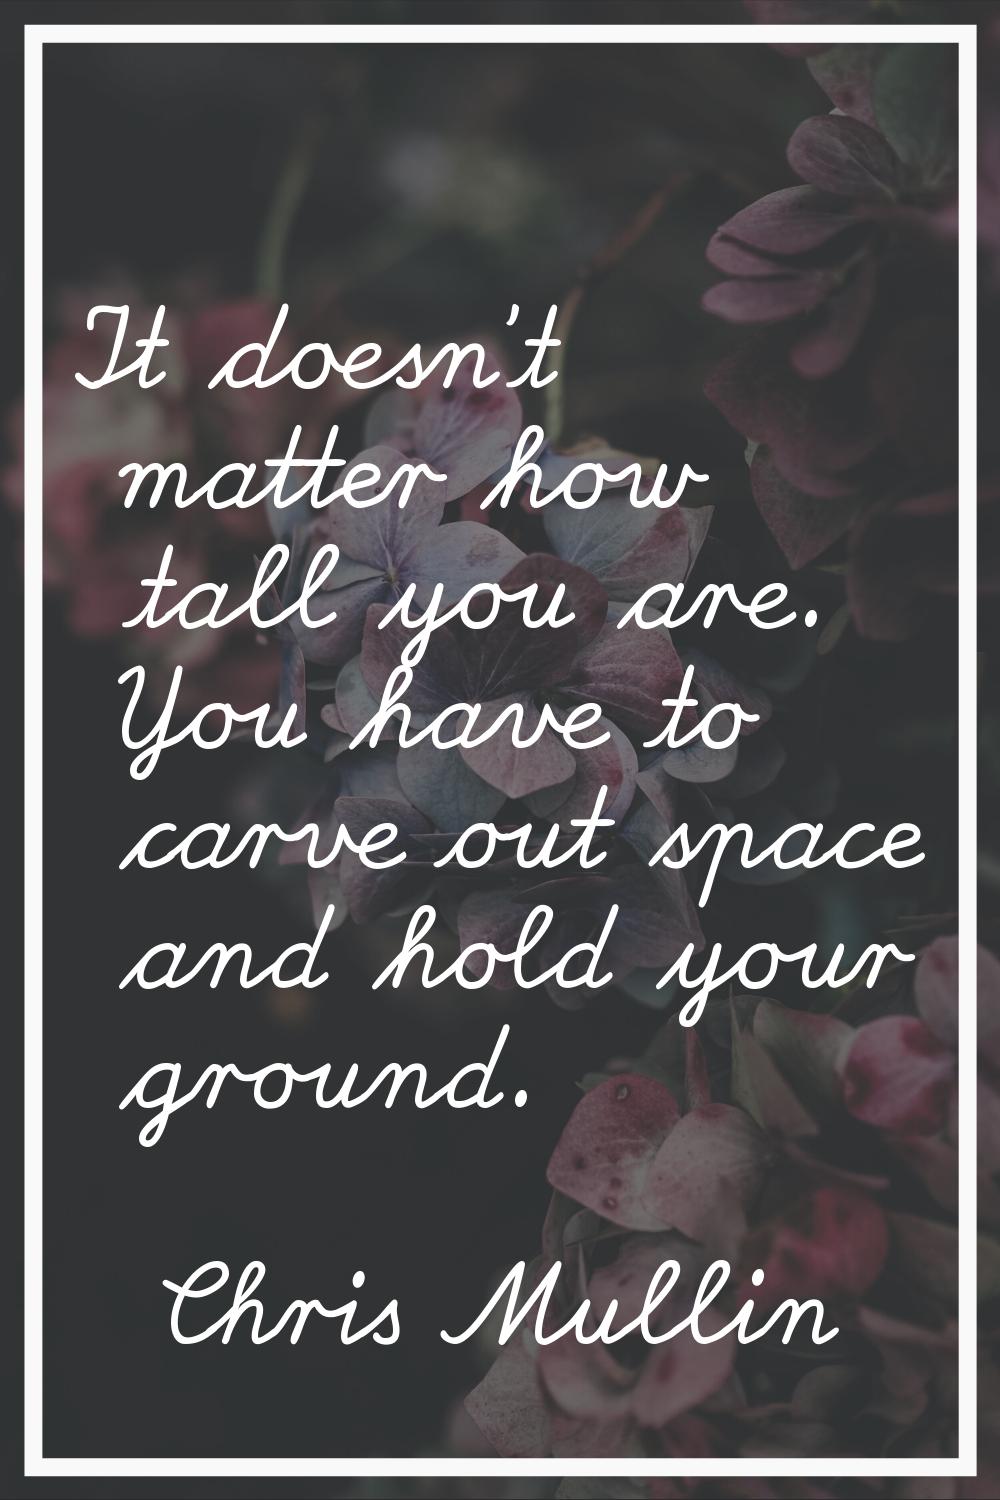 It doesn't matter how tall you are. You have to carve out space and hold your ground.